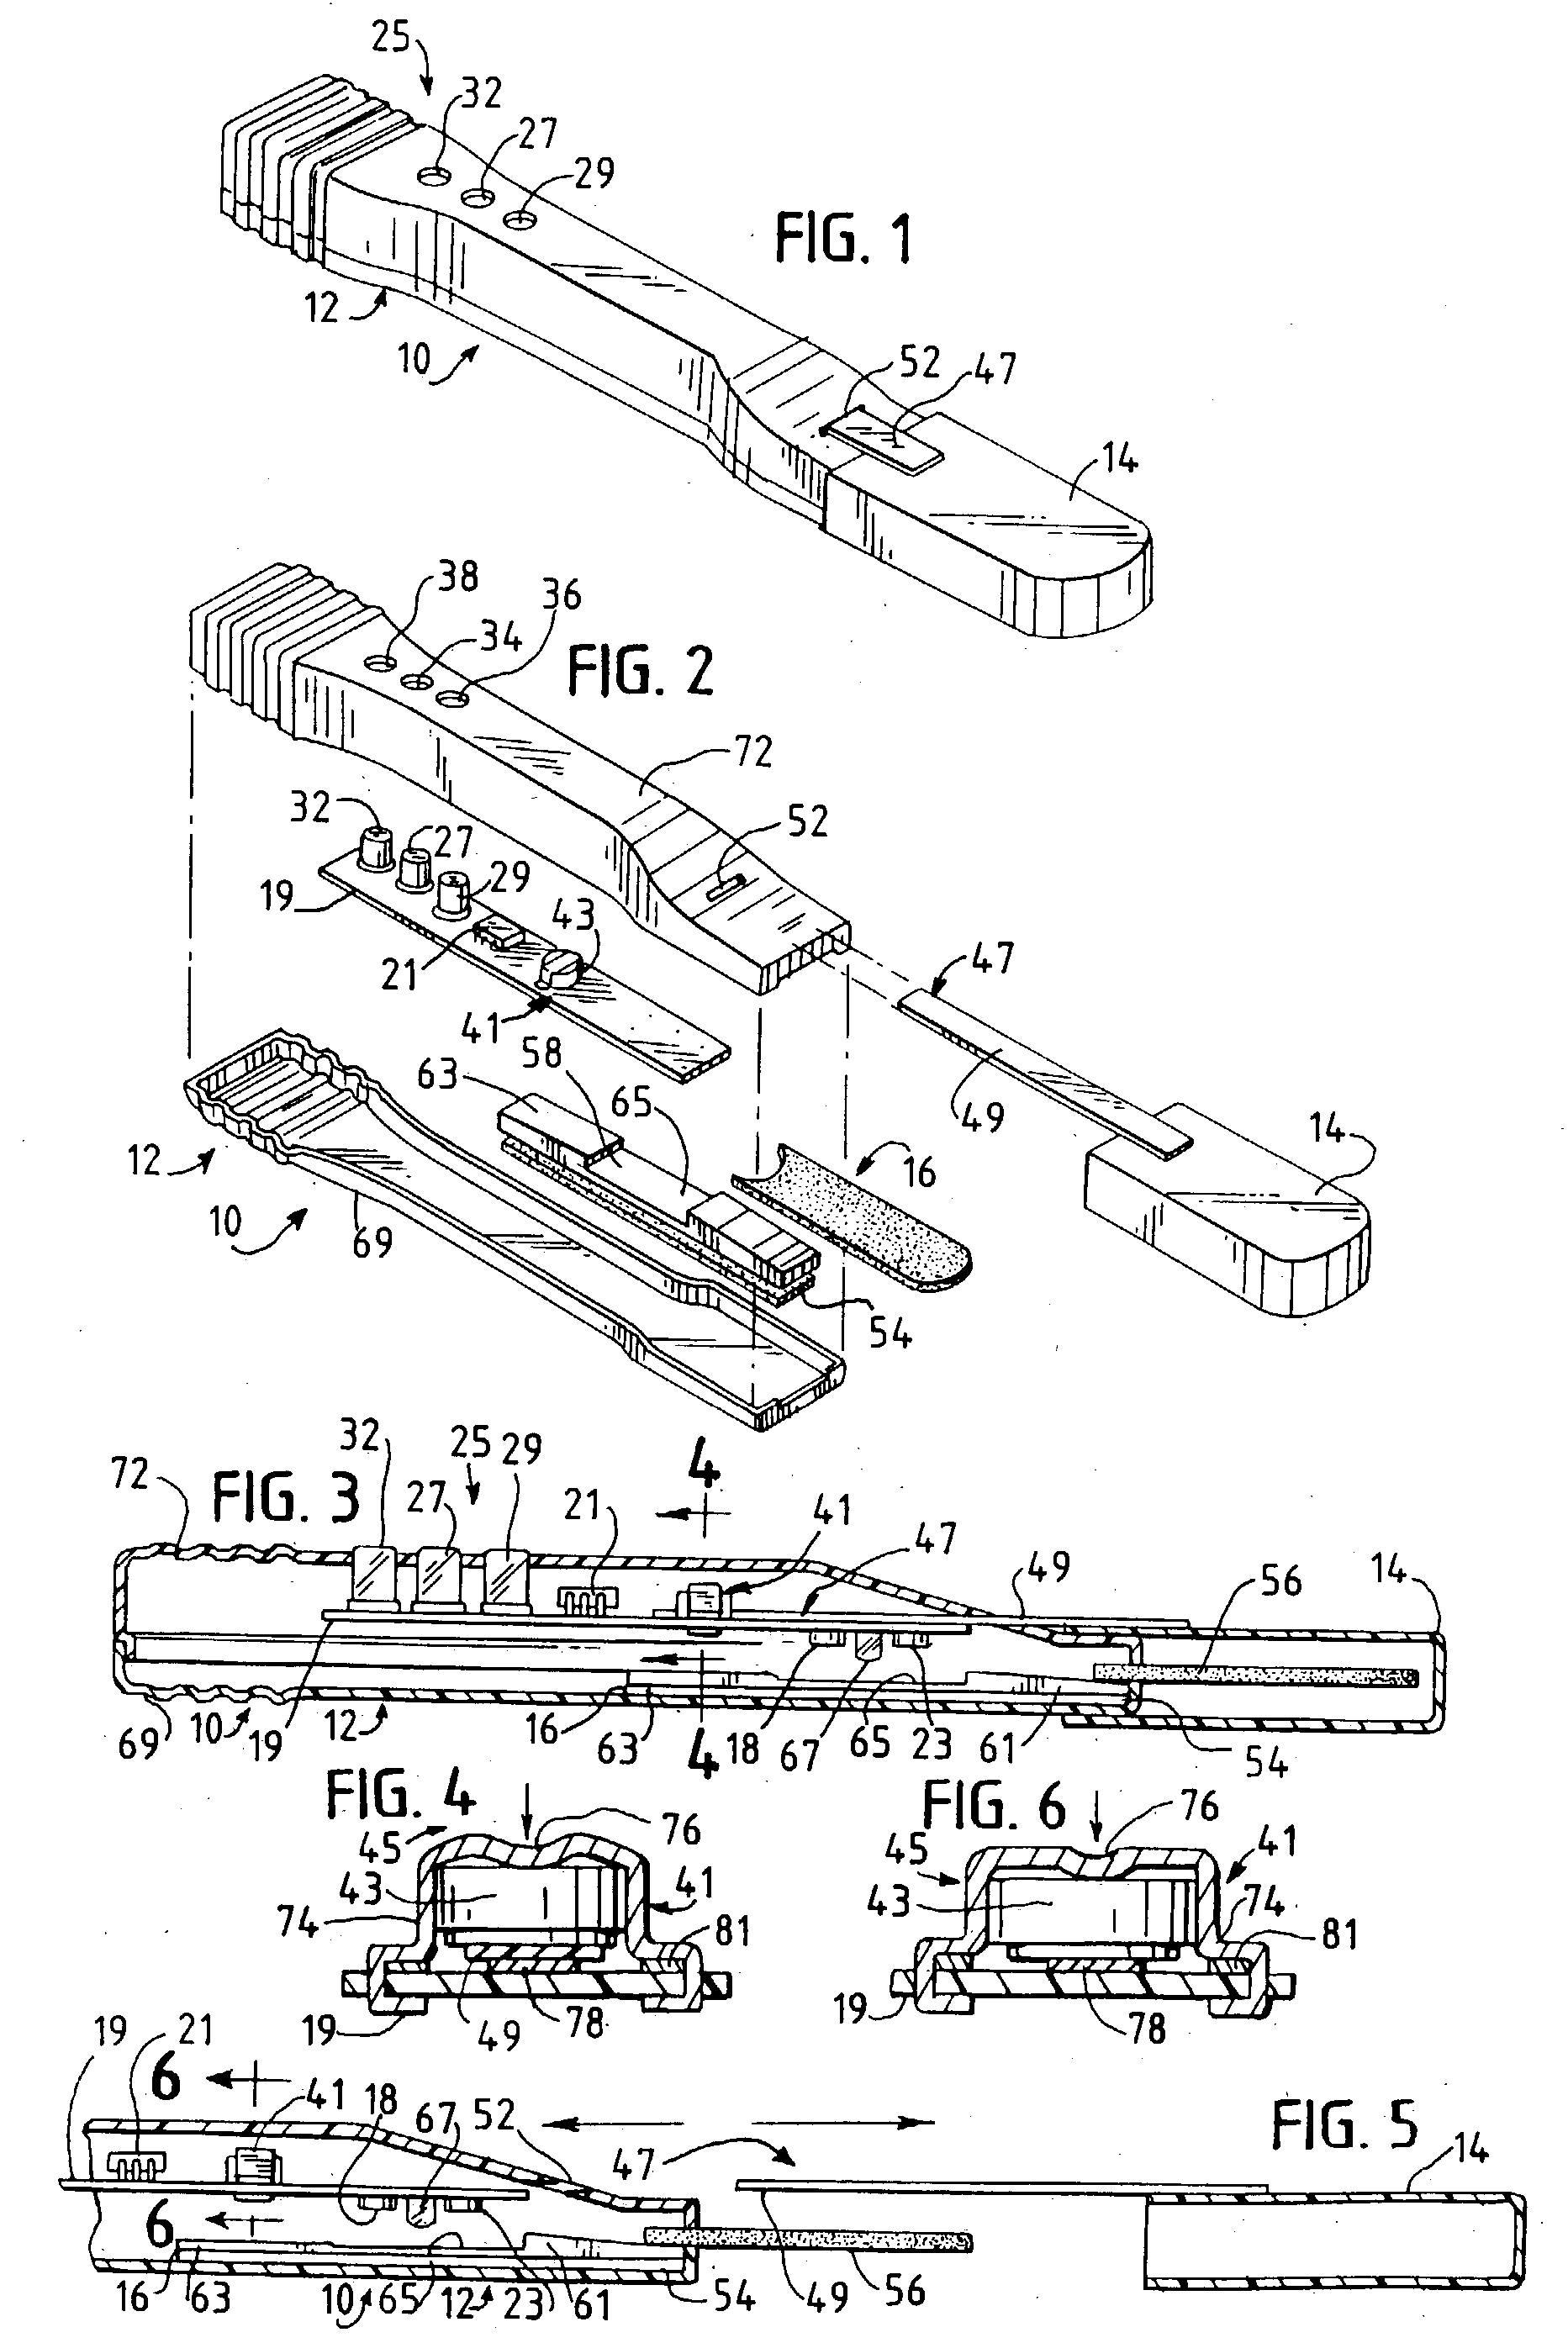 Method of processing assay test results